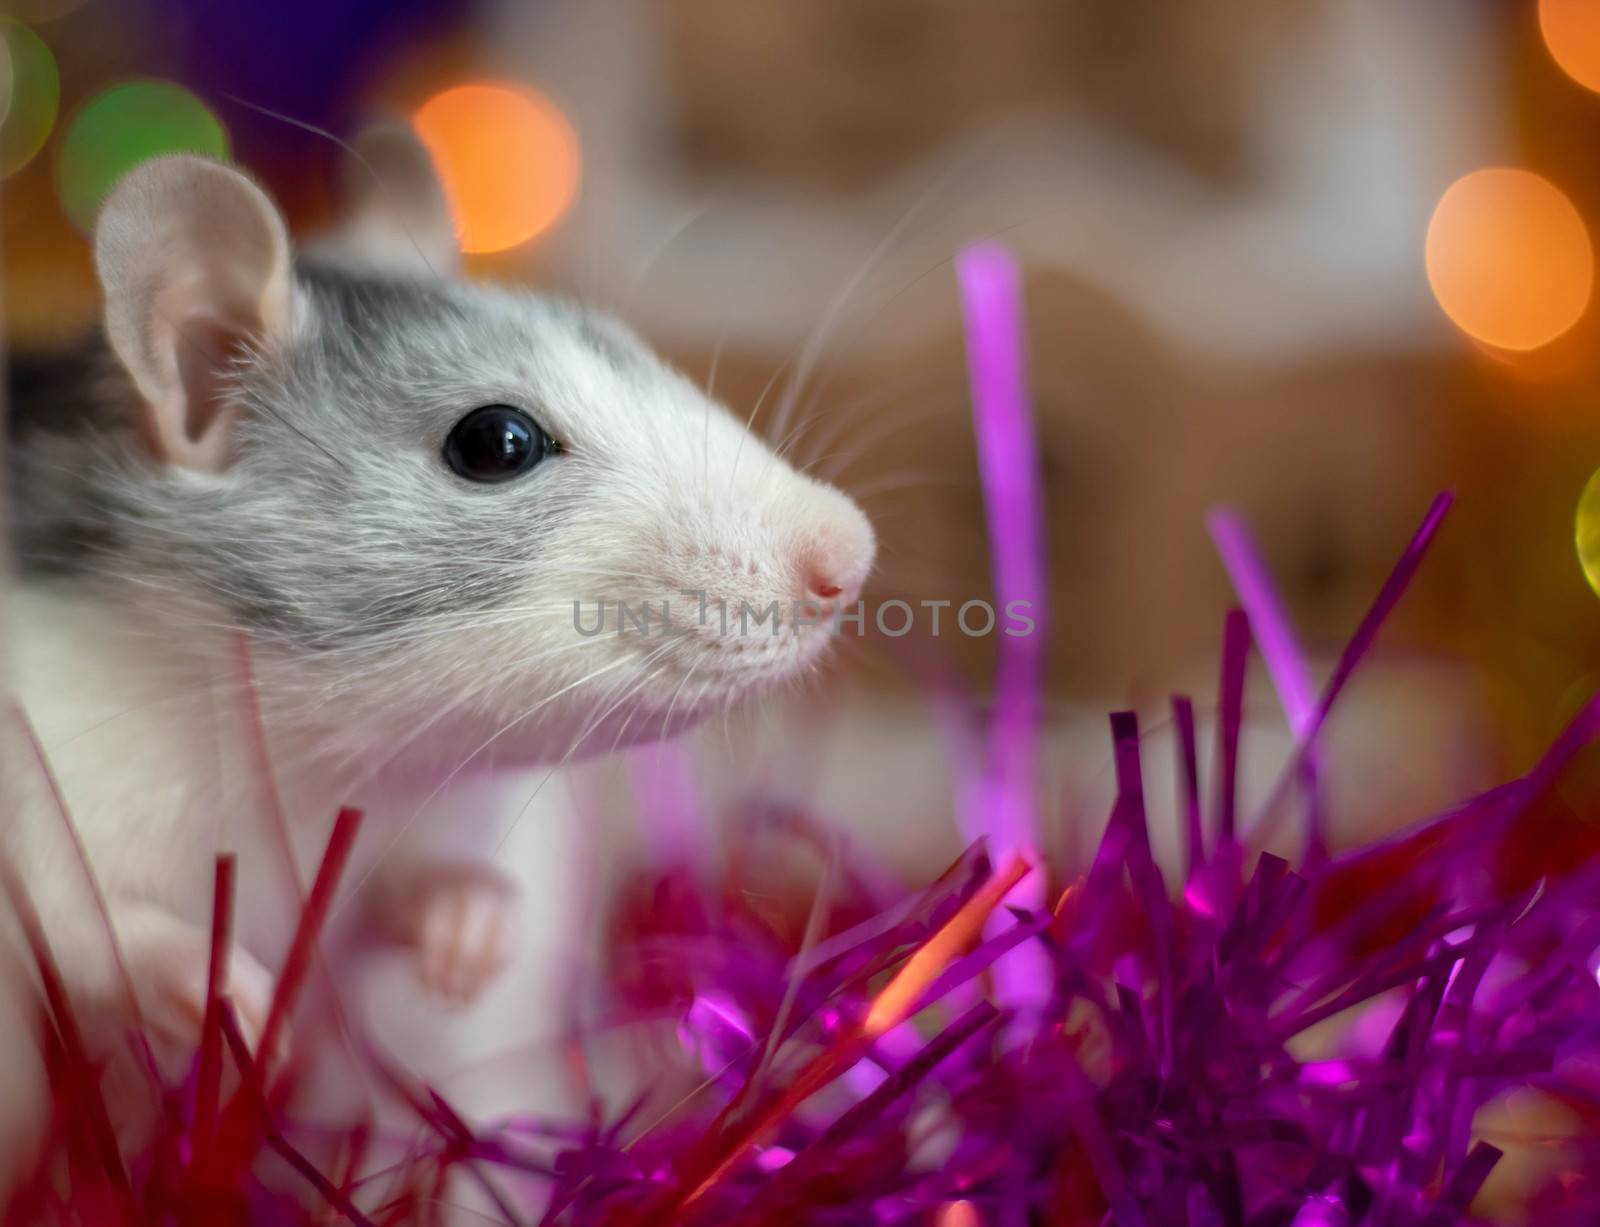 A close-up of a rat peeking out of its hiding place, a symbol of the 2020 Concept.Chinese horoscope by lapushka62